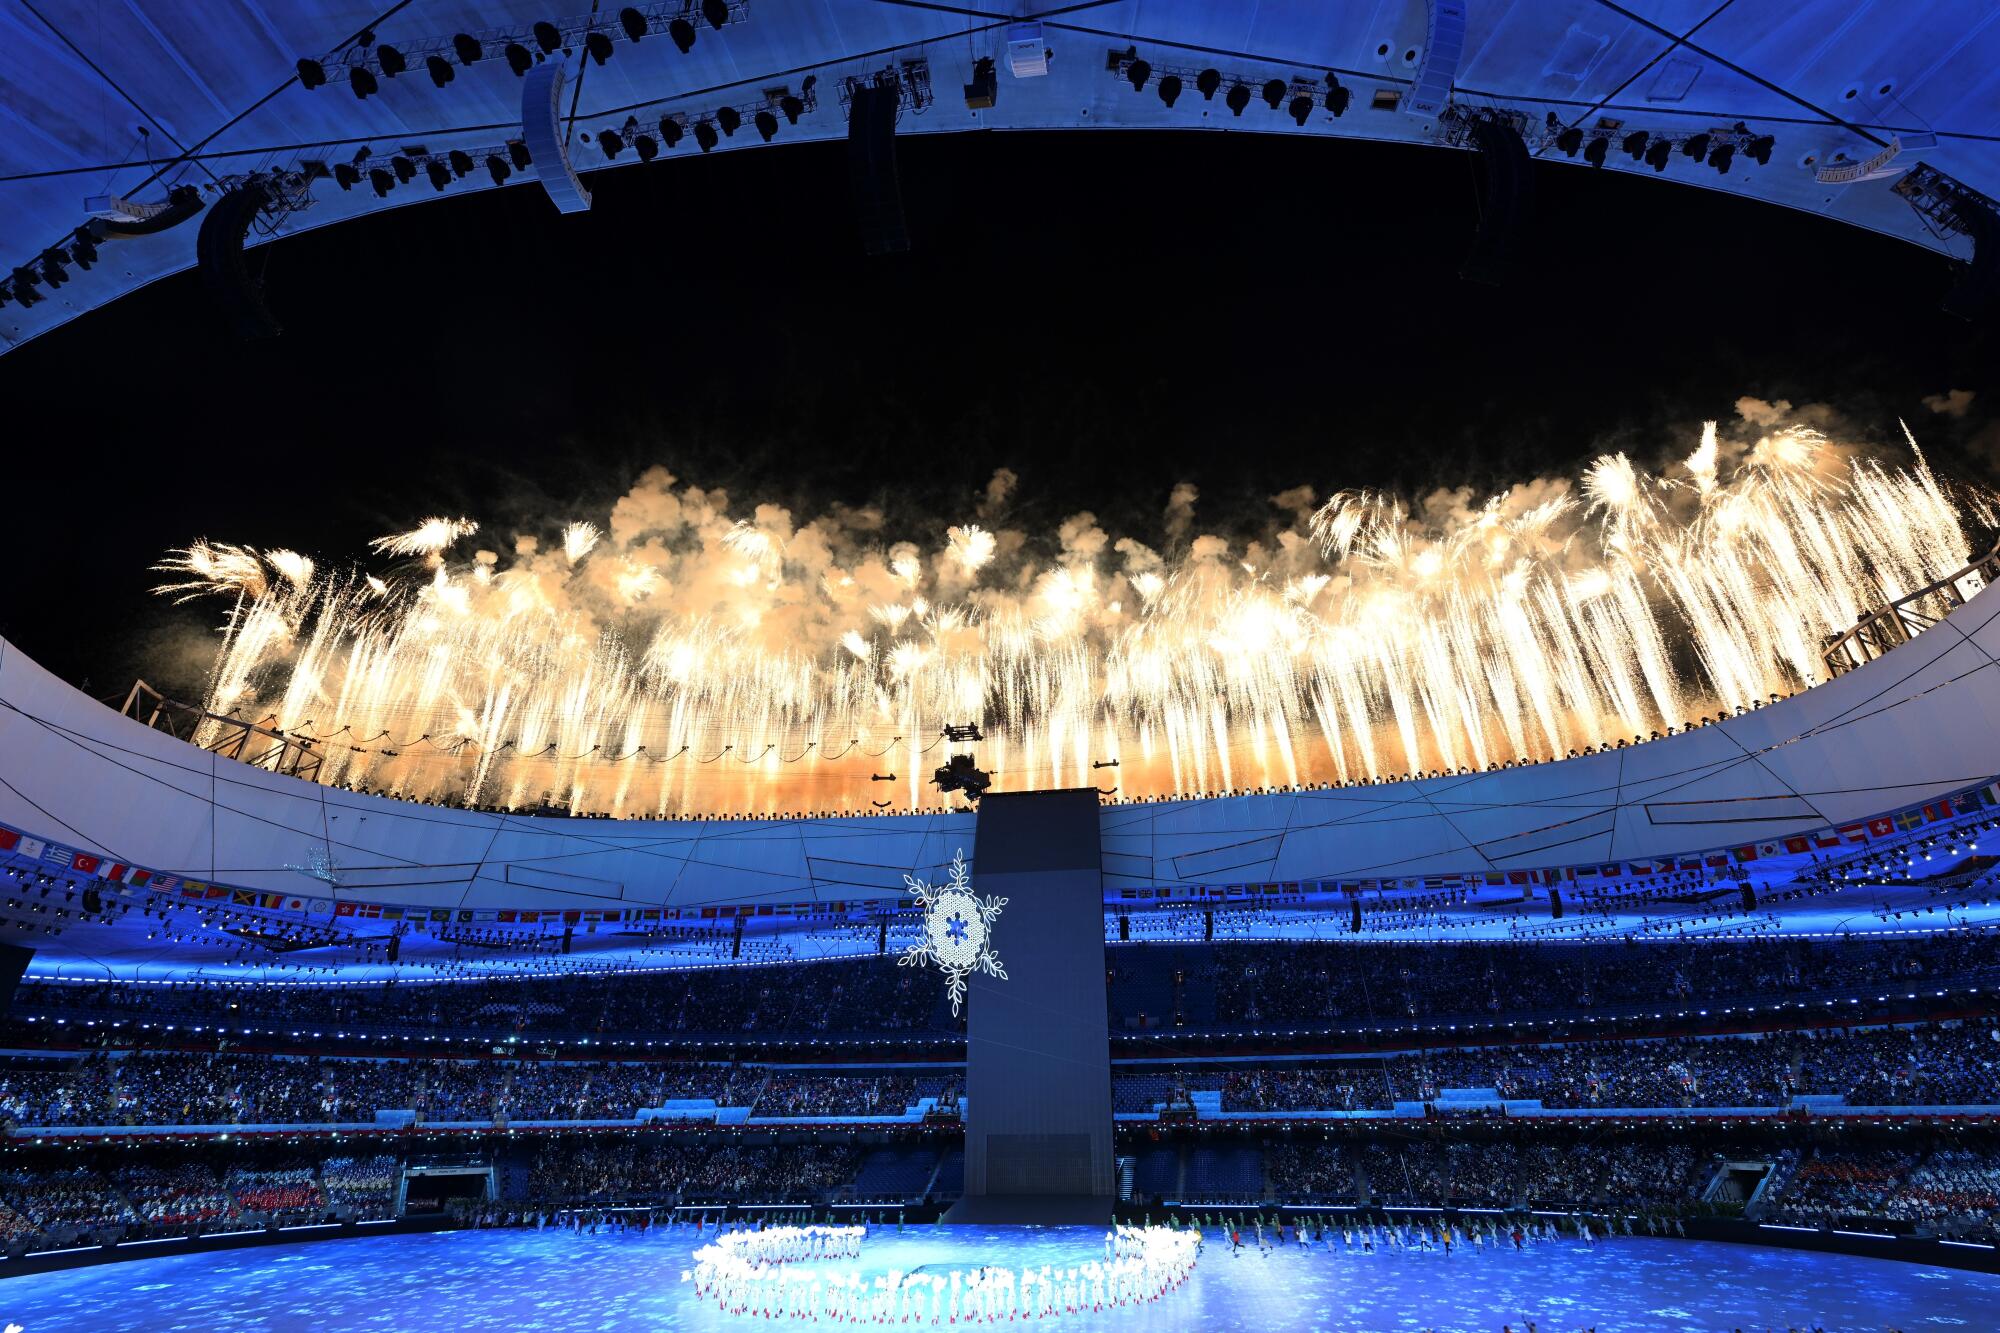 Fireworks light up the sky above National Stadium, known as Bird's Nest, during the opening ceremony.